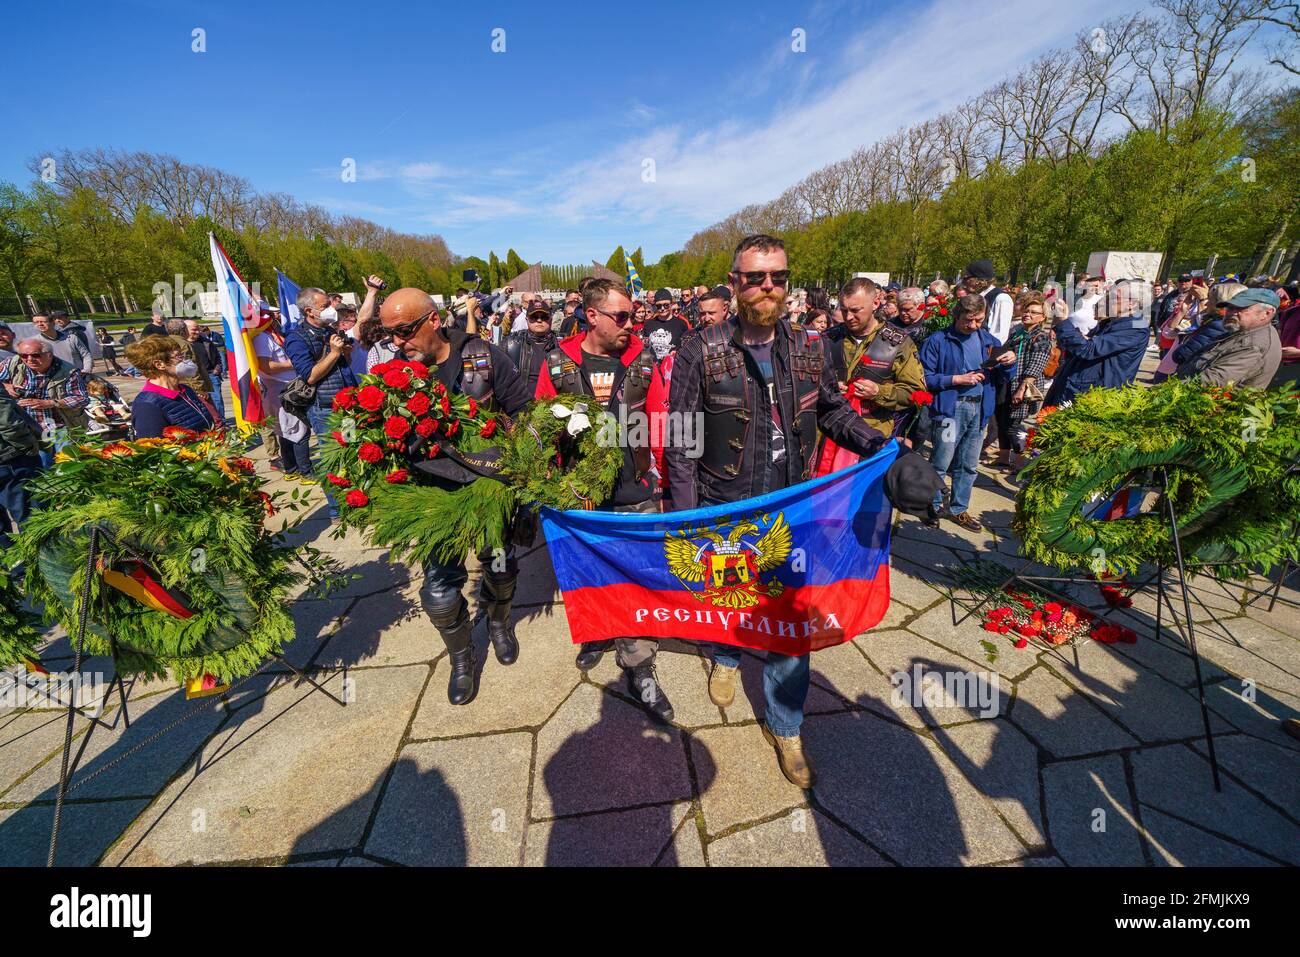 May 9th, 2021, Berlin, at the Soviet War Memorial in Treptower Park (Treptower Ehrenmal), a memorial and at the same time a military cemetery, numerous Russians and German-Russians commemorate the 76th Victory Day at the end of World War II with many colorful flags. Members of the Org RussiaDeutsche Wolfe Germany are also on site. It is an offshoot of aftertwolfe, a motorcycle club from Russia. The memorial was erected in 1949 on the instructions of the Soviet military administration in Germany to honor the soldiers of the Red Army who died in World War II. Over 7000 of the soldiers who died i Stock Photo